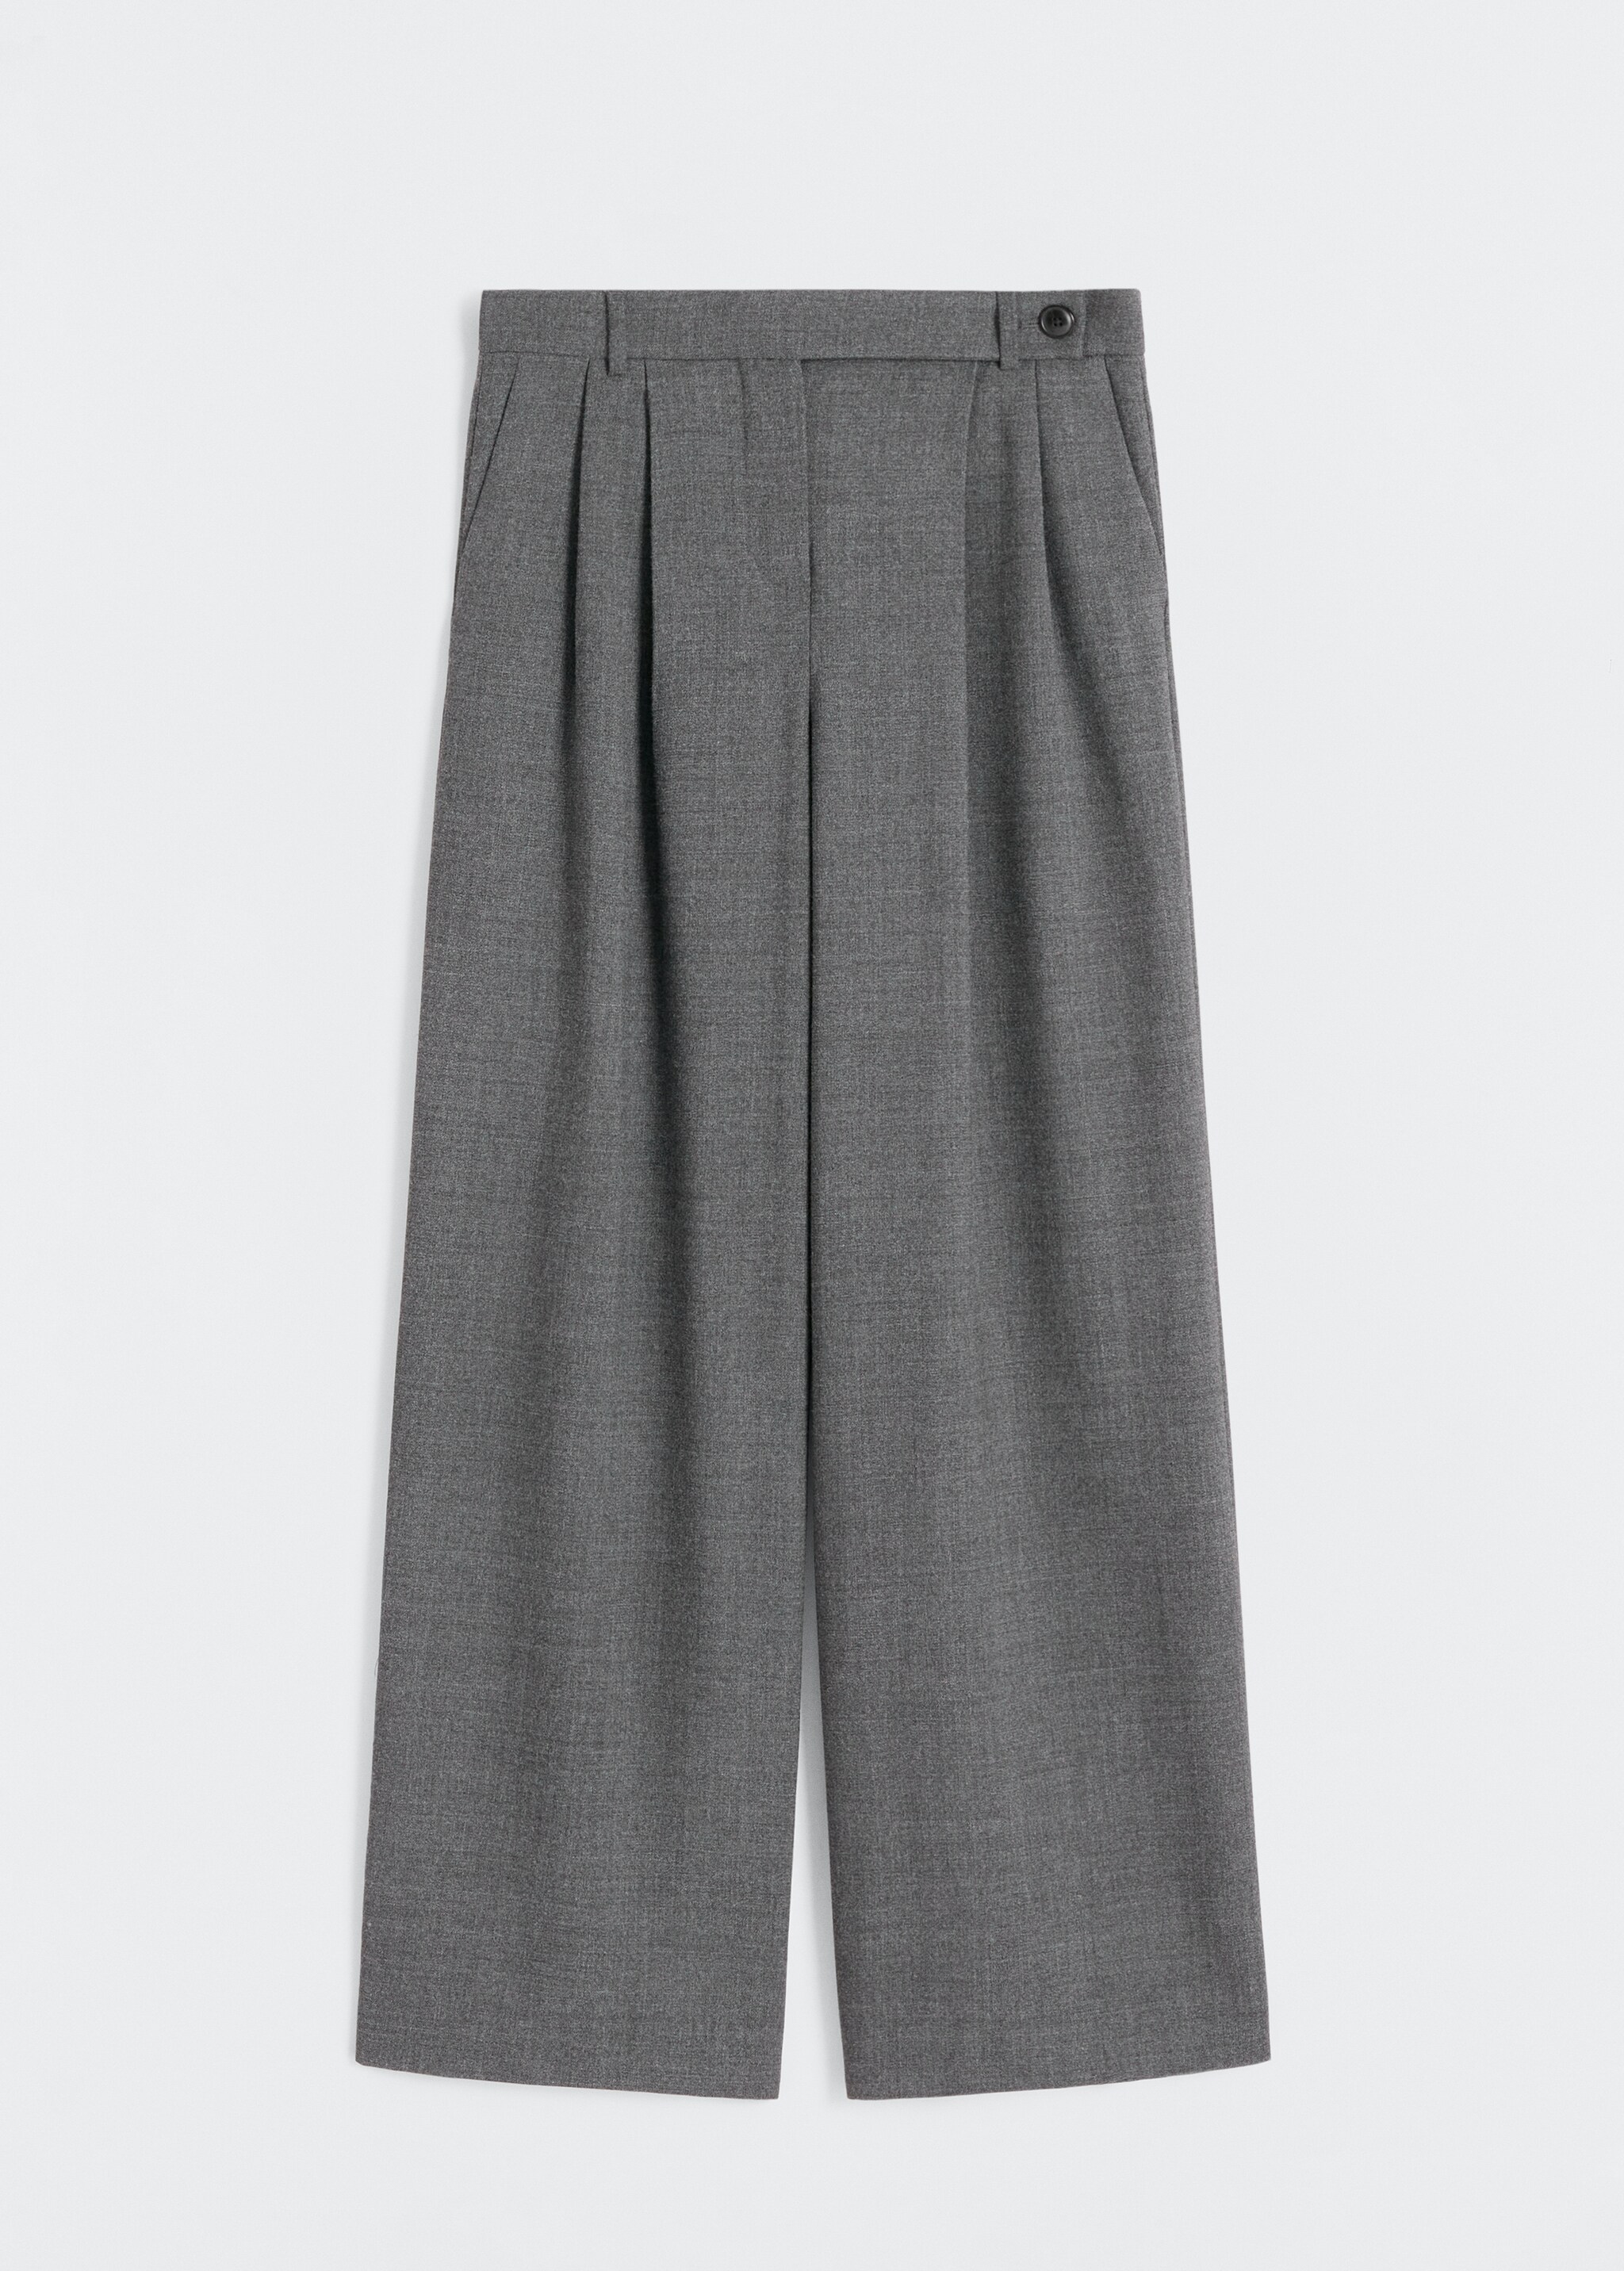 Wool suit pants - Article without model